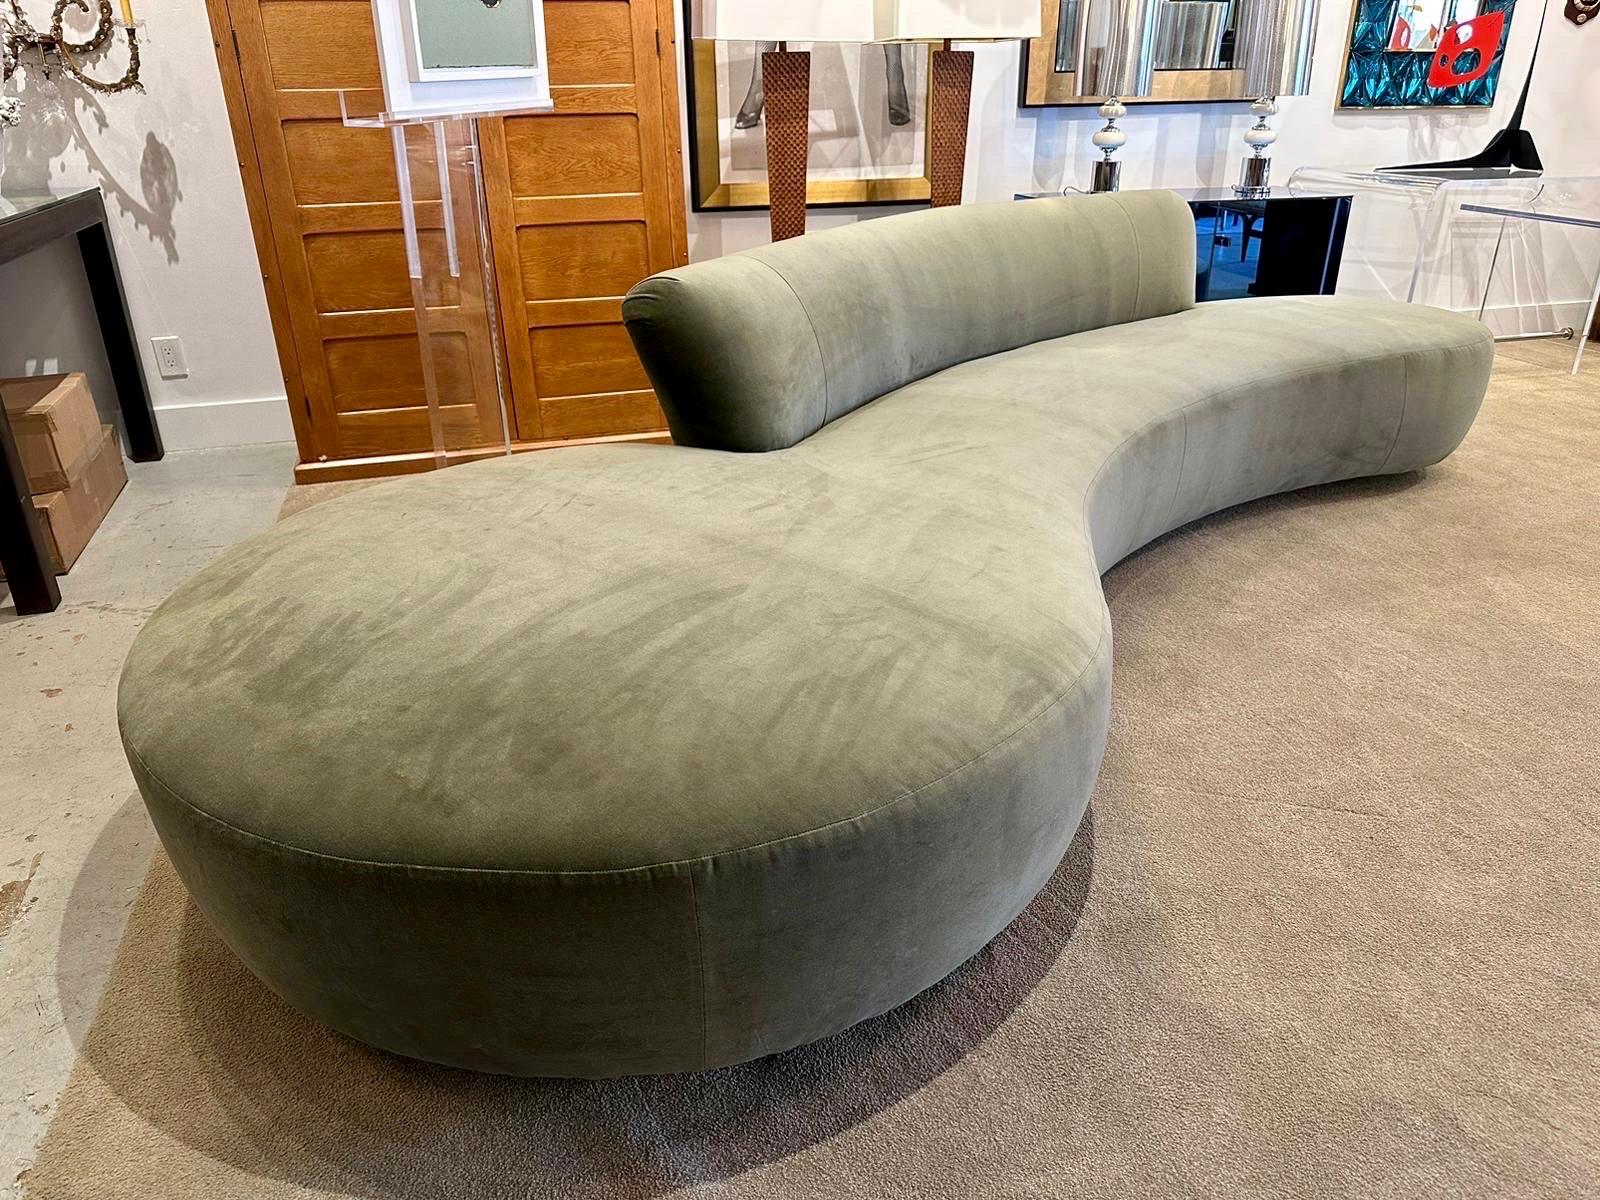 A large serpentine style sofa reupholstered in sage green velvet.  Although there was no label attached, it is very possible this is designed by Vladimir Kagan.